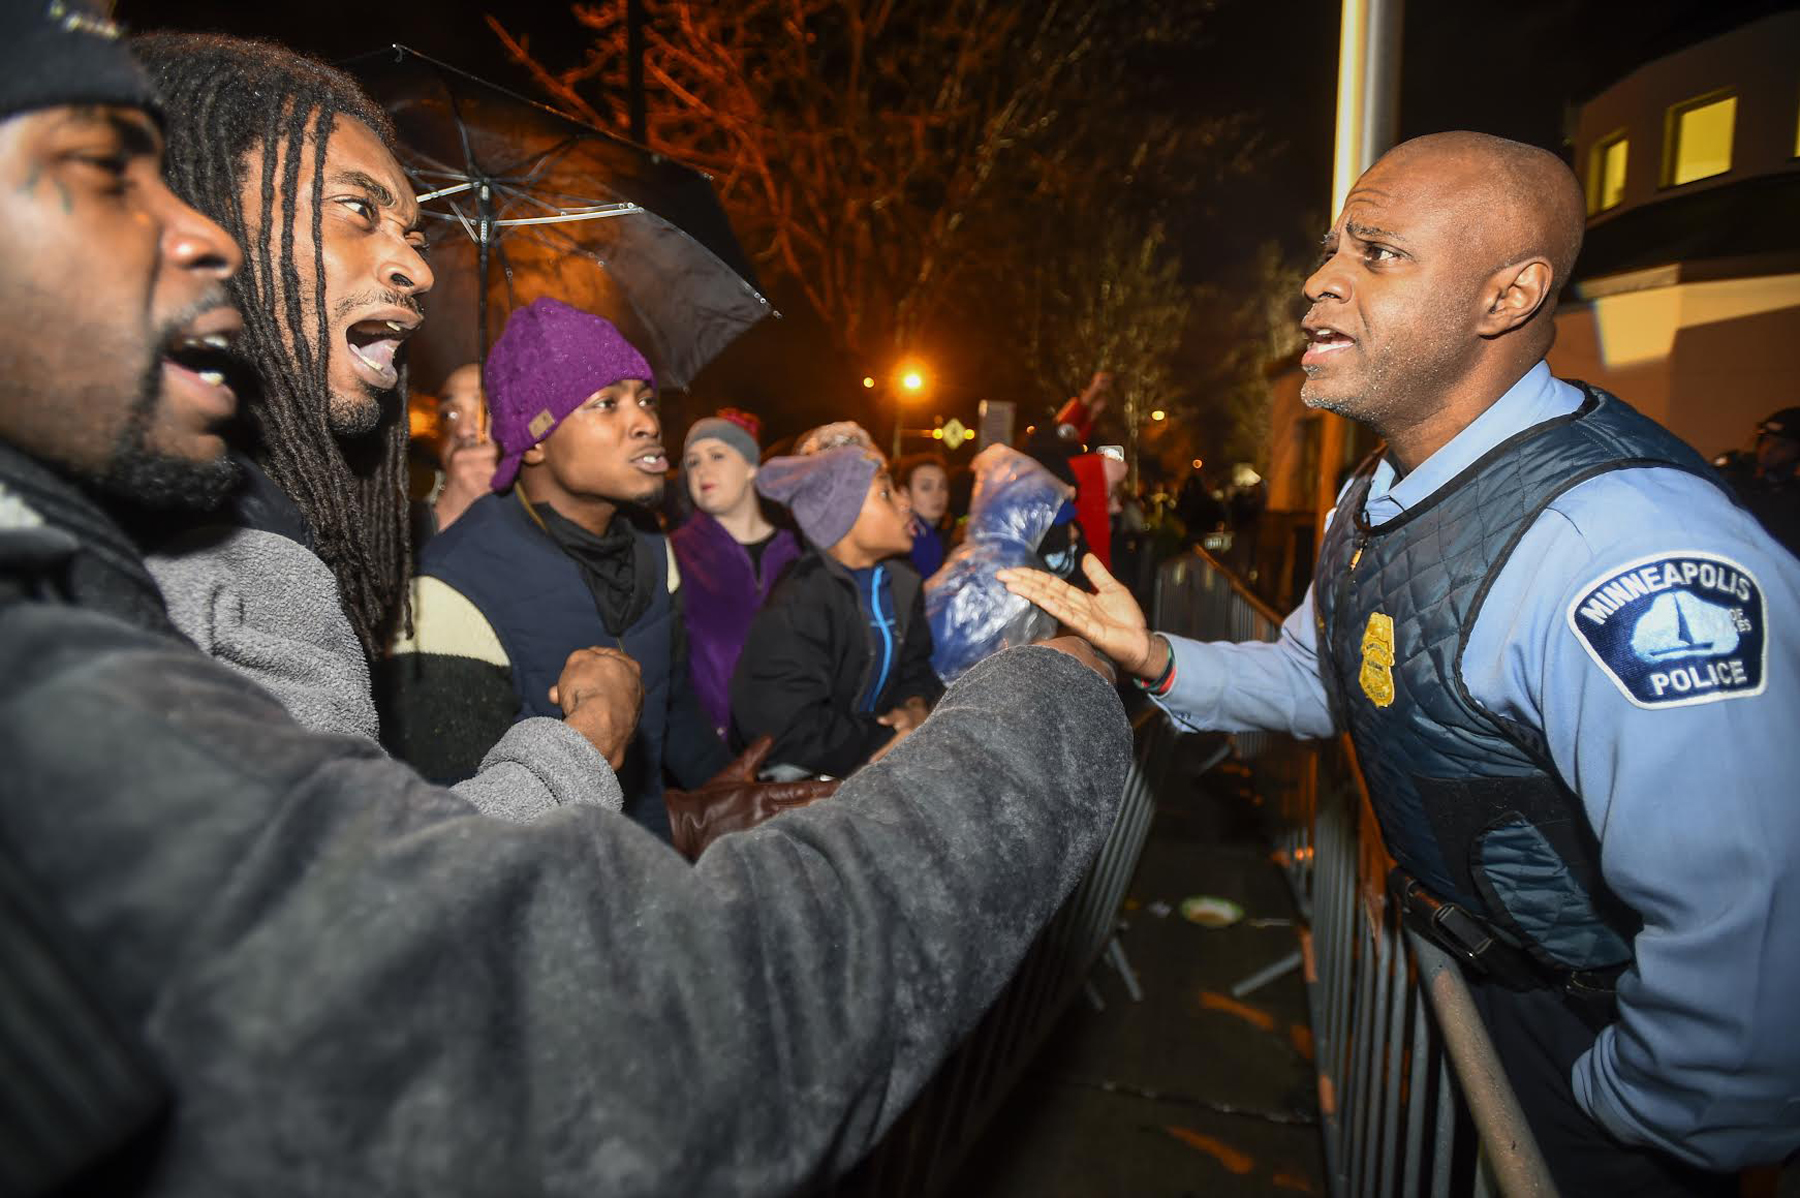 PHOTO: A police officer talks with demonstrators in front of a north Minneapolis police precinct during a protest in response to the shooting death of Jamar Clark by police officers in Minneapolis, Minnesota, Nov. 18, 2015.